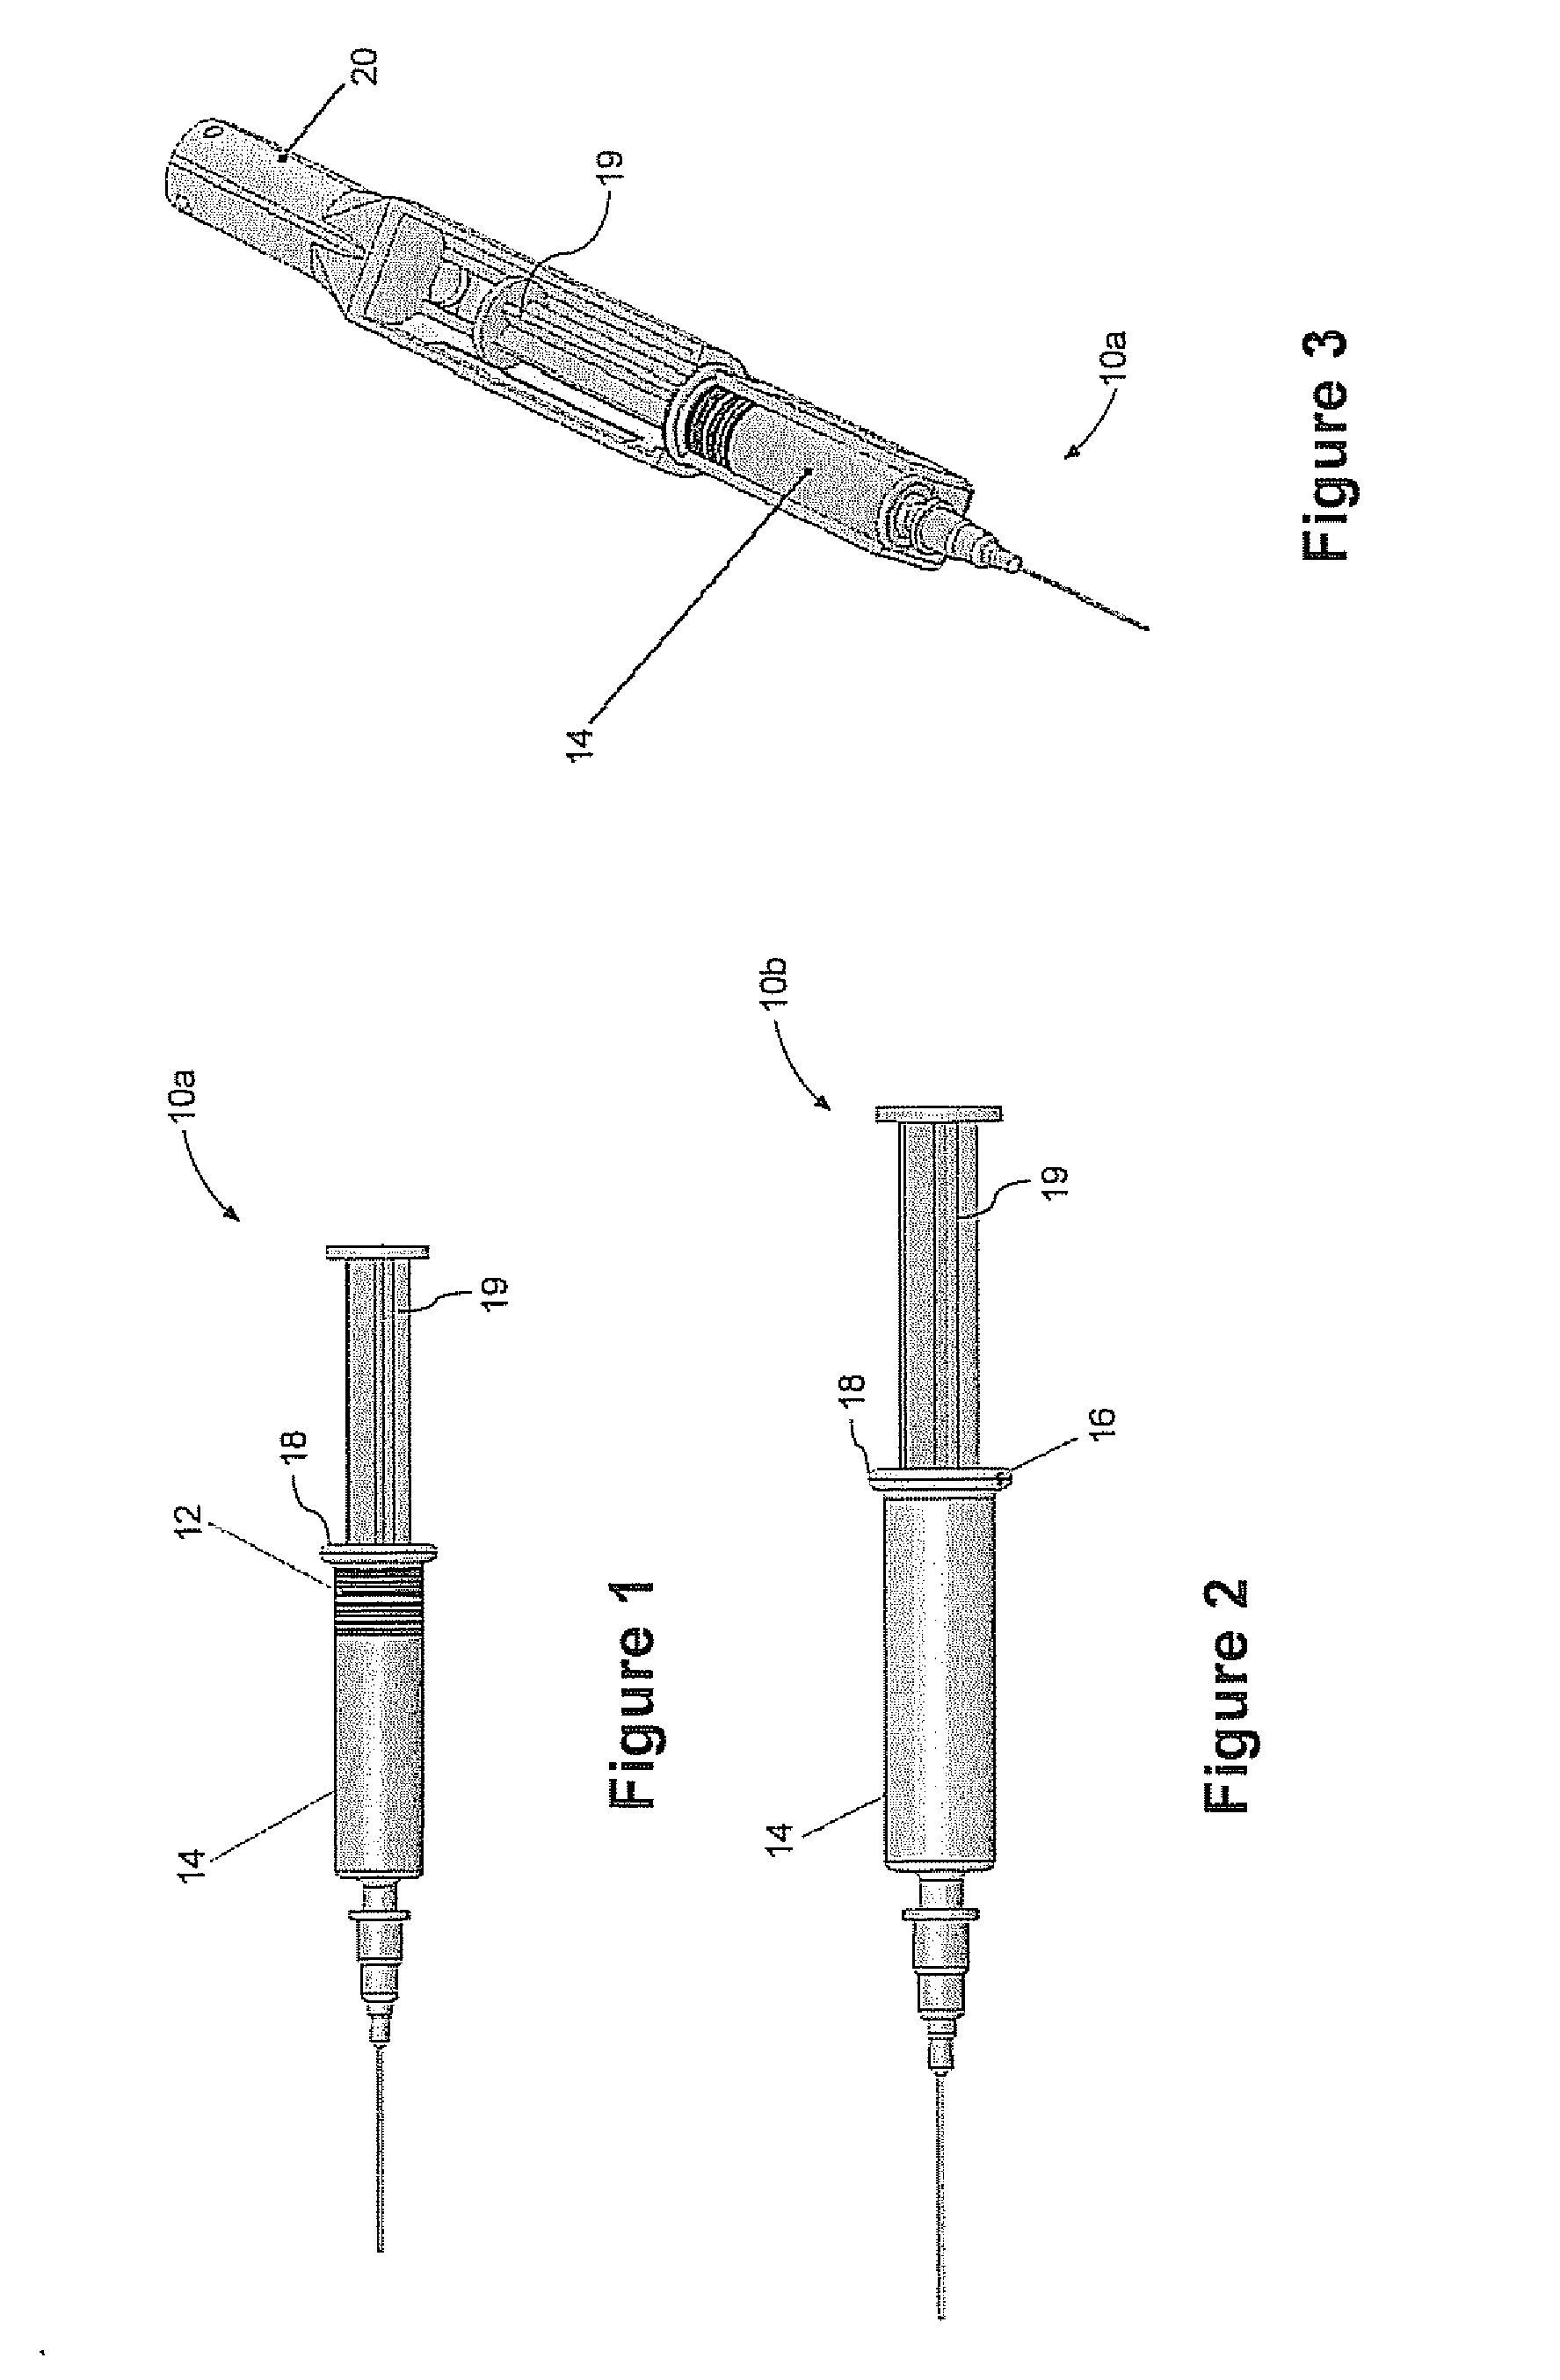 System and Method for Intelligent Administration and Documentation of Drug Usage